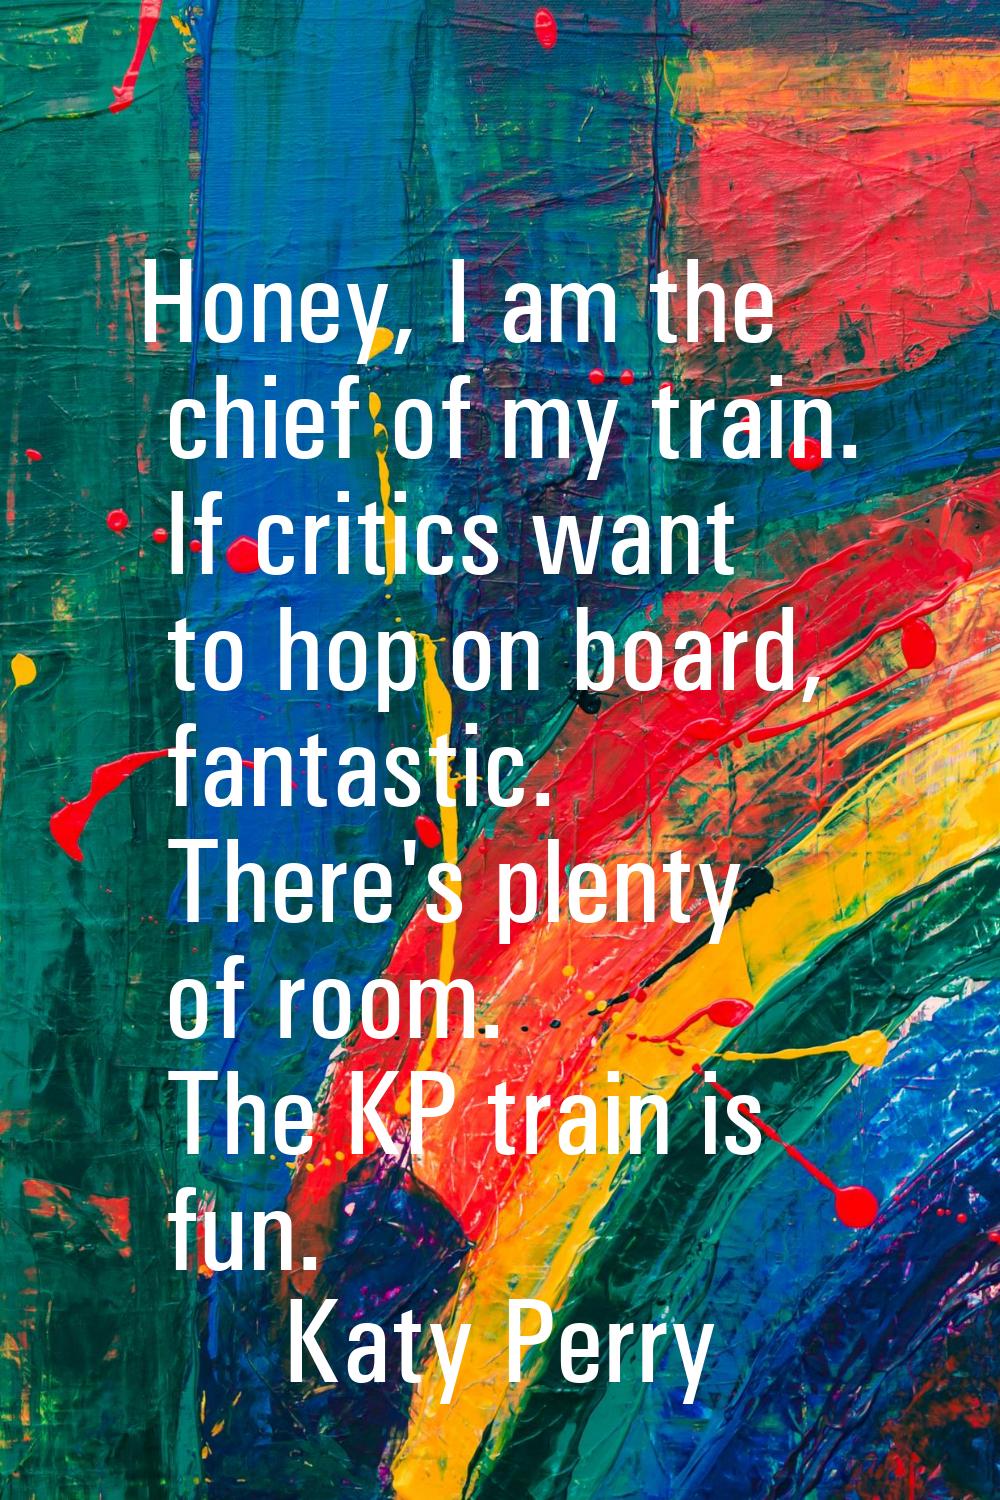 Honey, I am the chief of my train. If critics want to hop on board, fantastic. There's plenty of ro